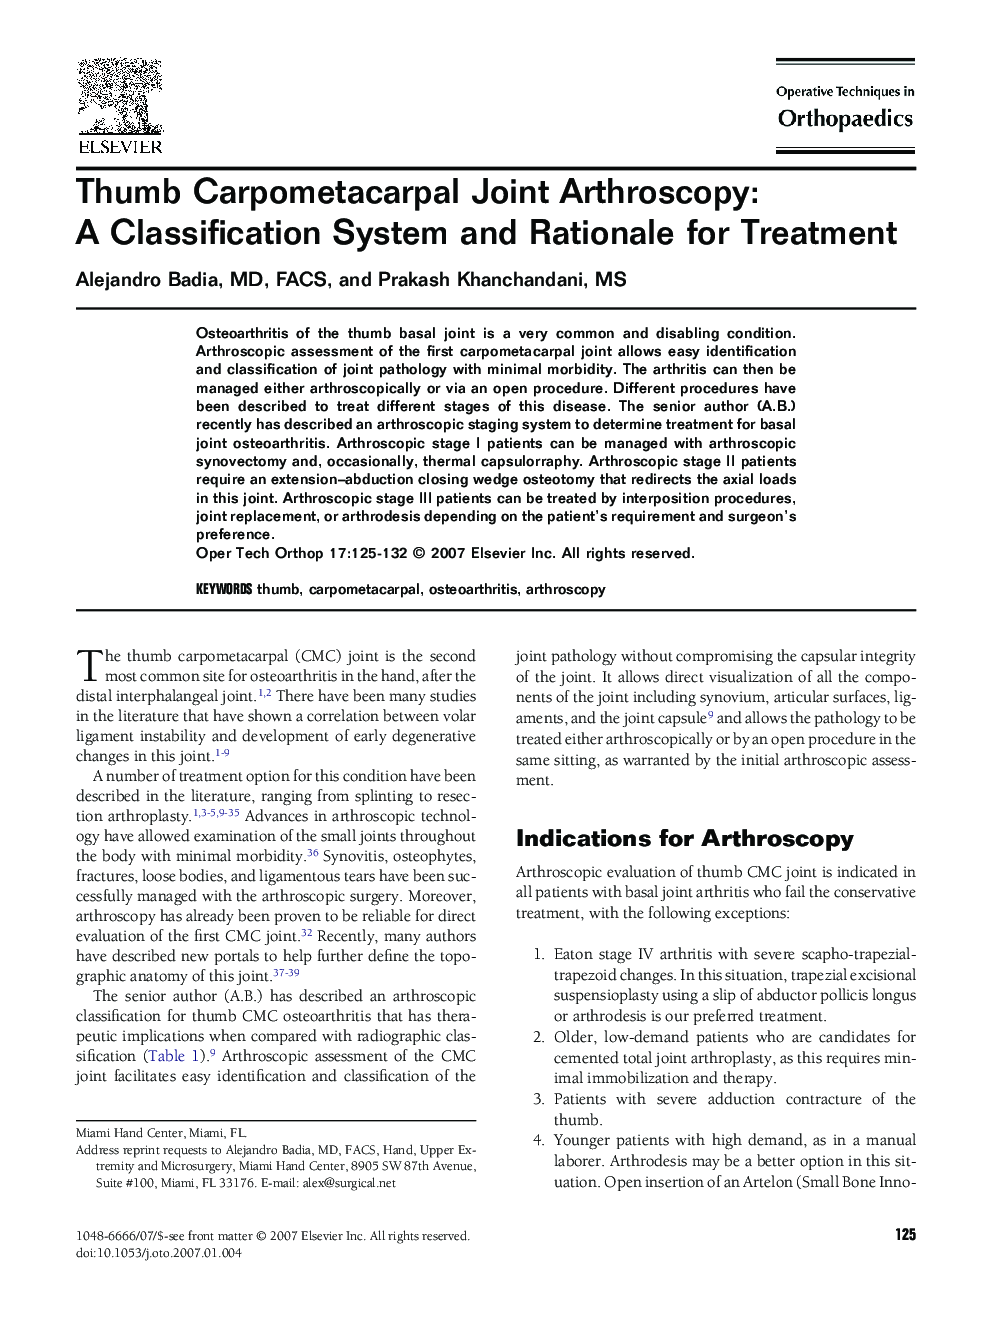 Thumb Carpometacarpal Joint Arthroscopy: A Classification System and Rationale for Treatment